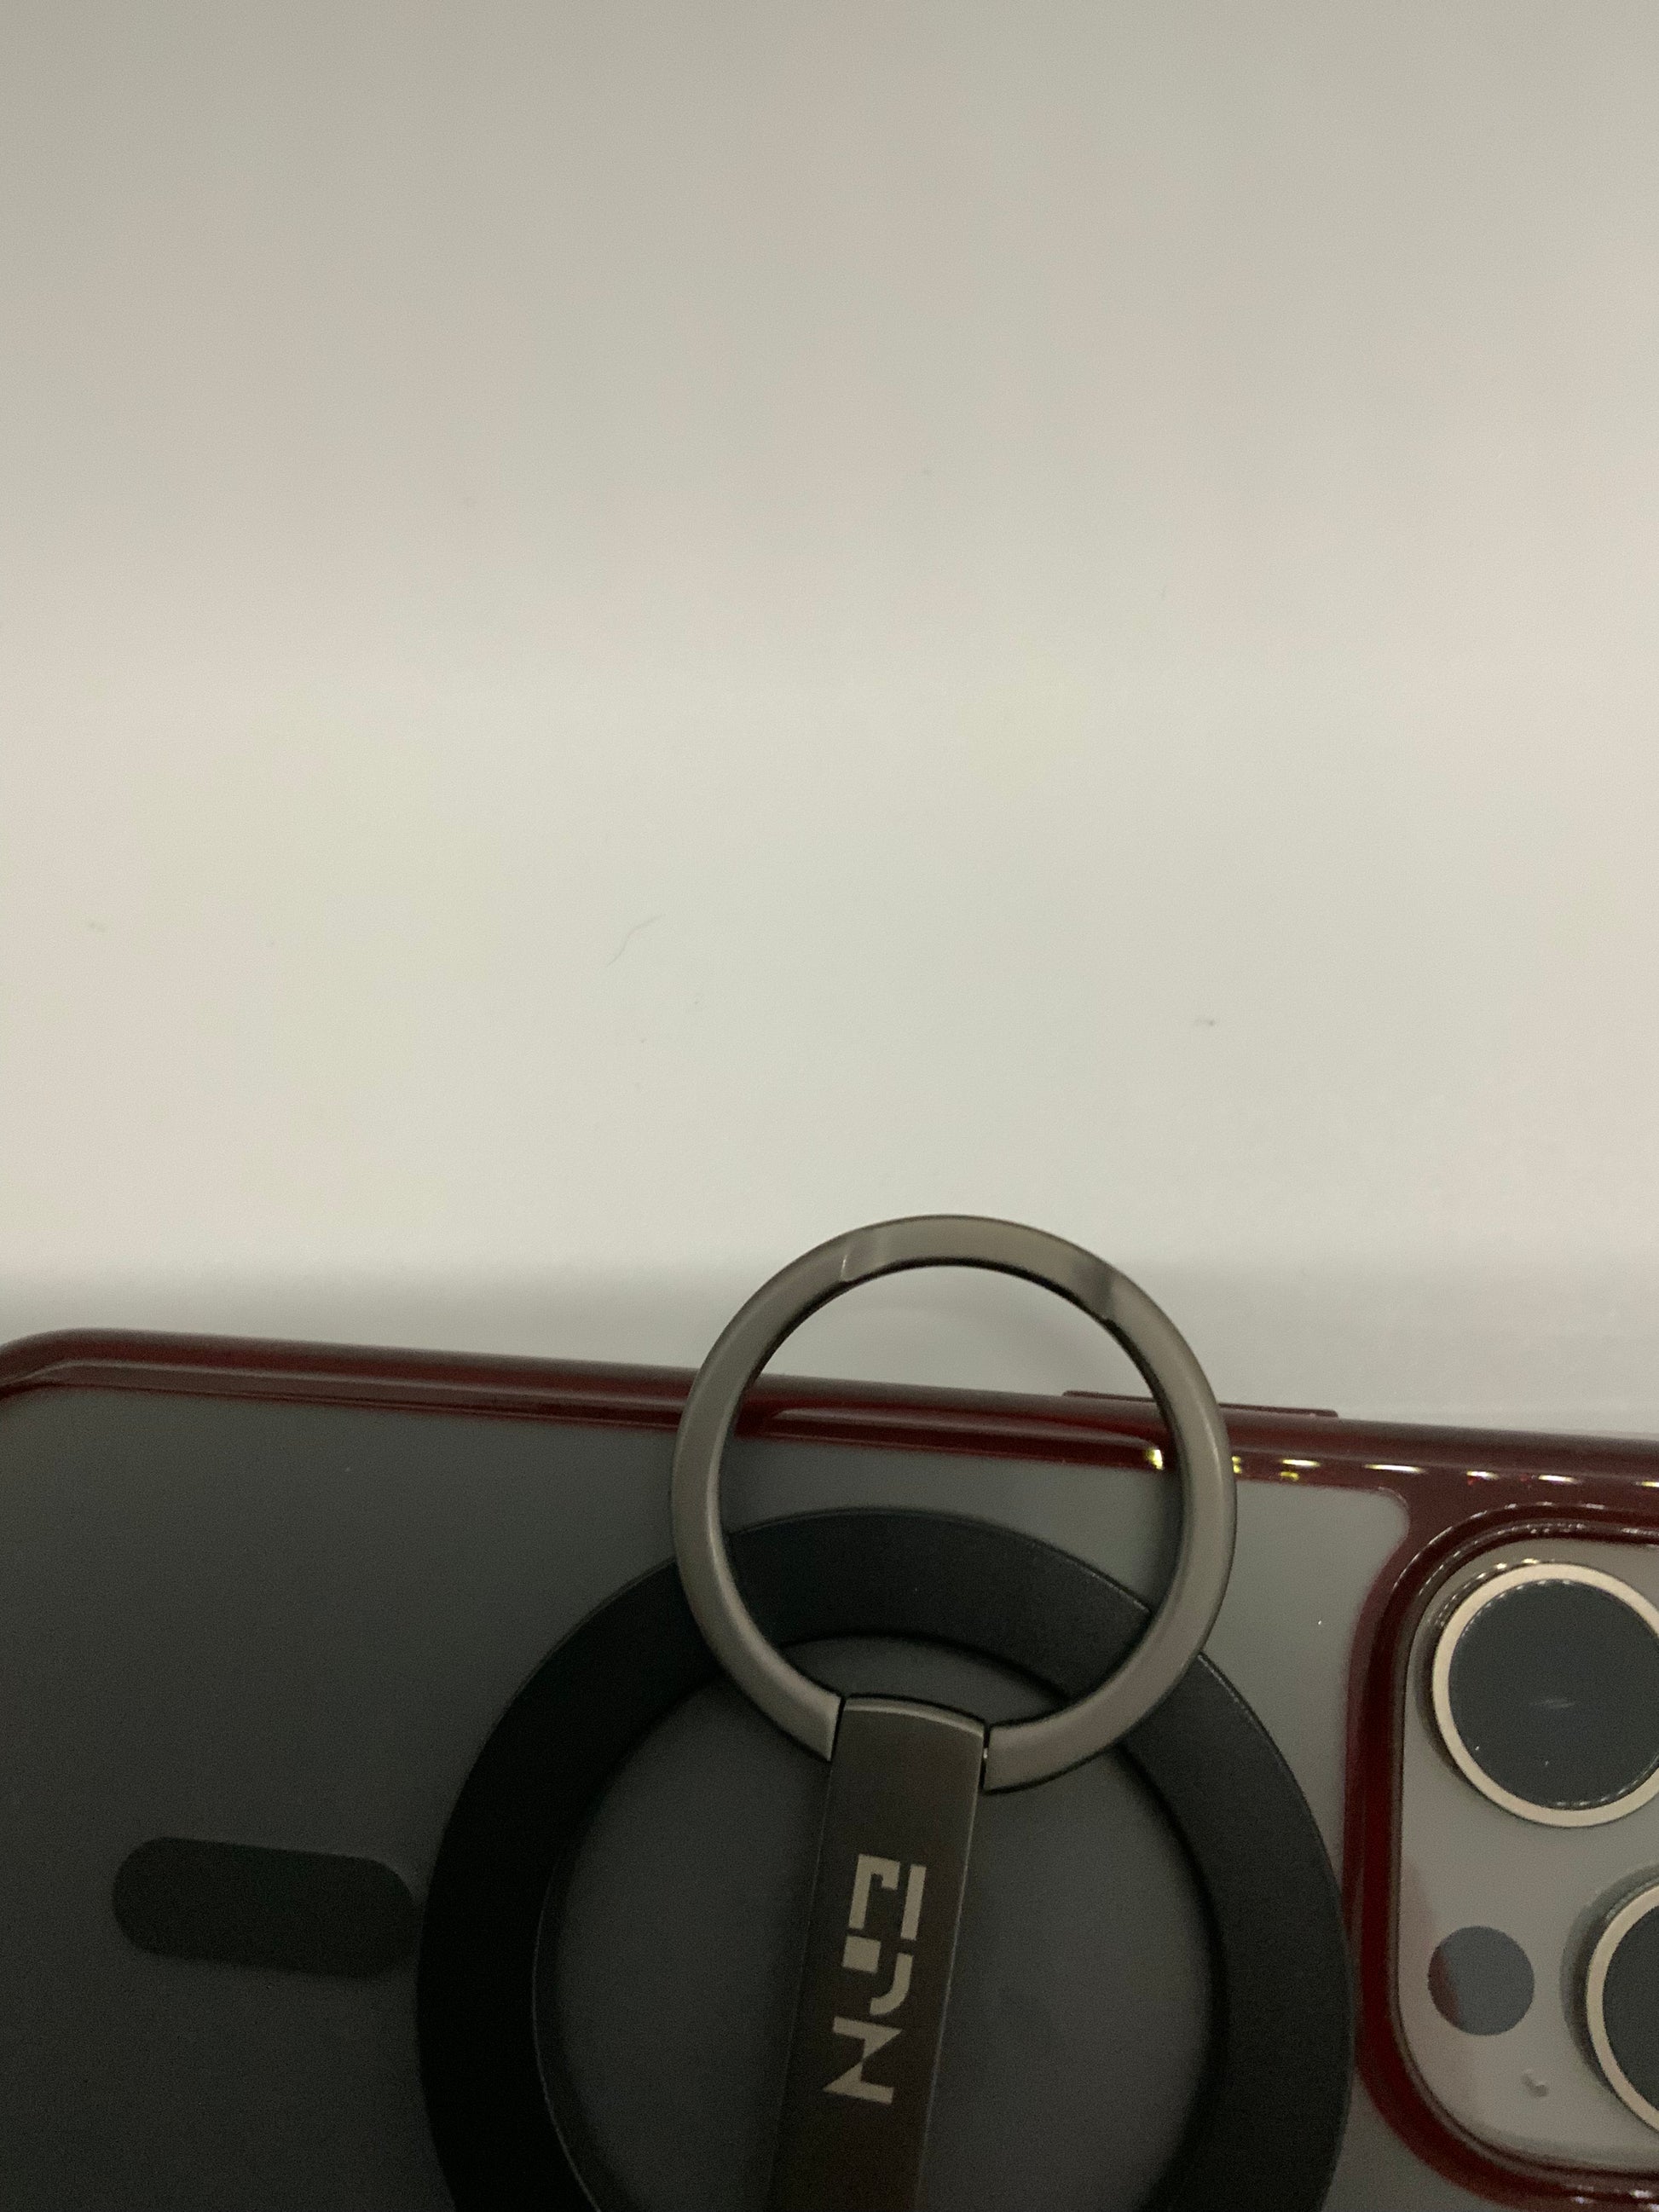 Be My AI: The picture shows a close-up of what appears to be the back of a smartphone with a ring holder attached to it. The smartphone has a red border and a dark-colored back. On the top right corner of the smartphone, there are two camera lenses and a flash within a rectangular section. The ring holder is attached to the back of the smartphone and has a dark circular base with a metal ring. The metal ring is attached to a small rectangular piece that has the letters "EIN" written on it. The background is